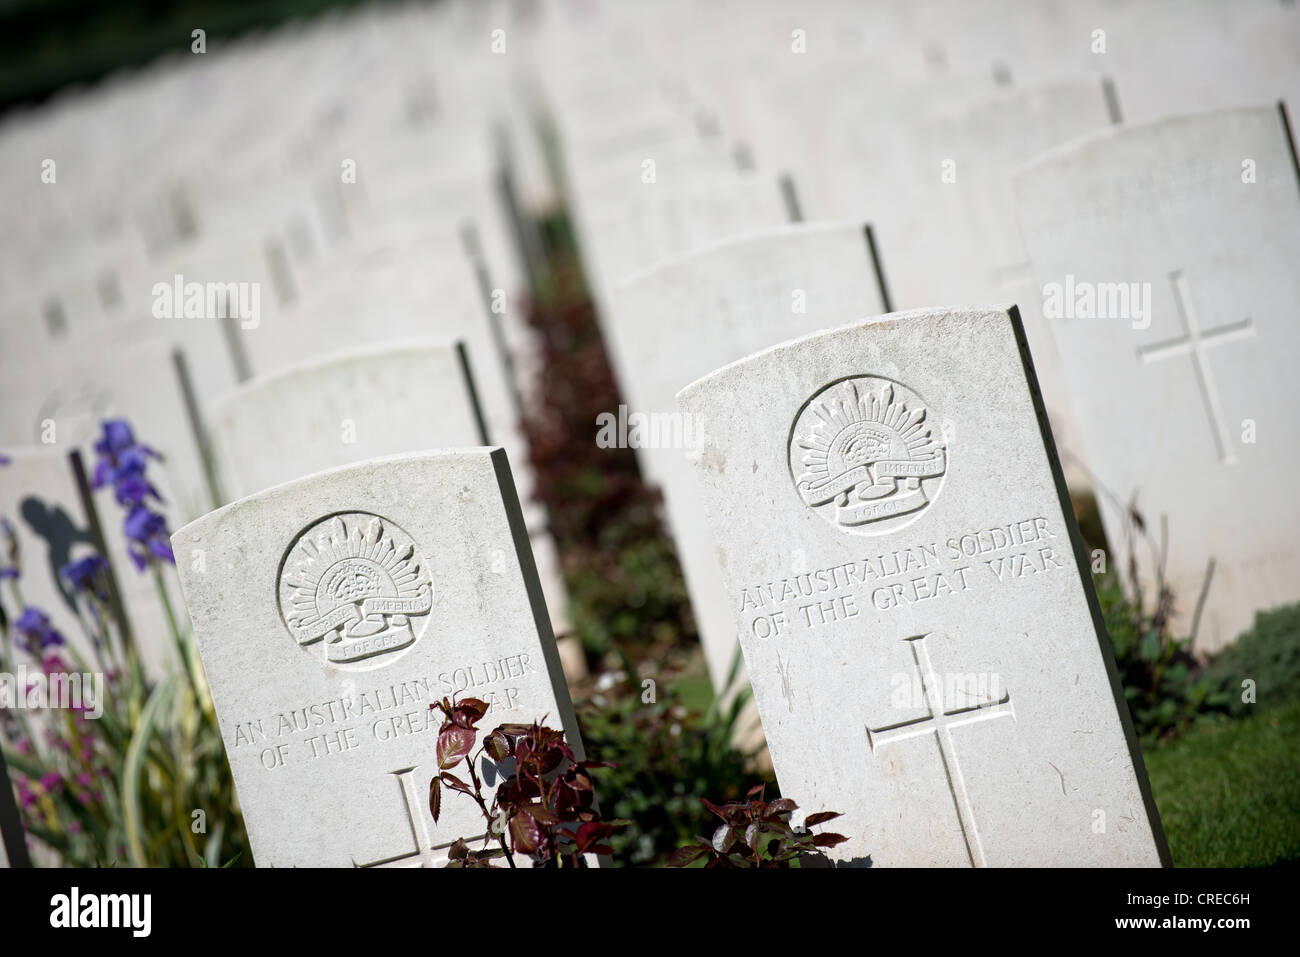 Delville Wood military cemetery Longueval France Stock Photo